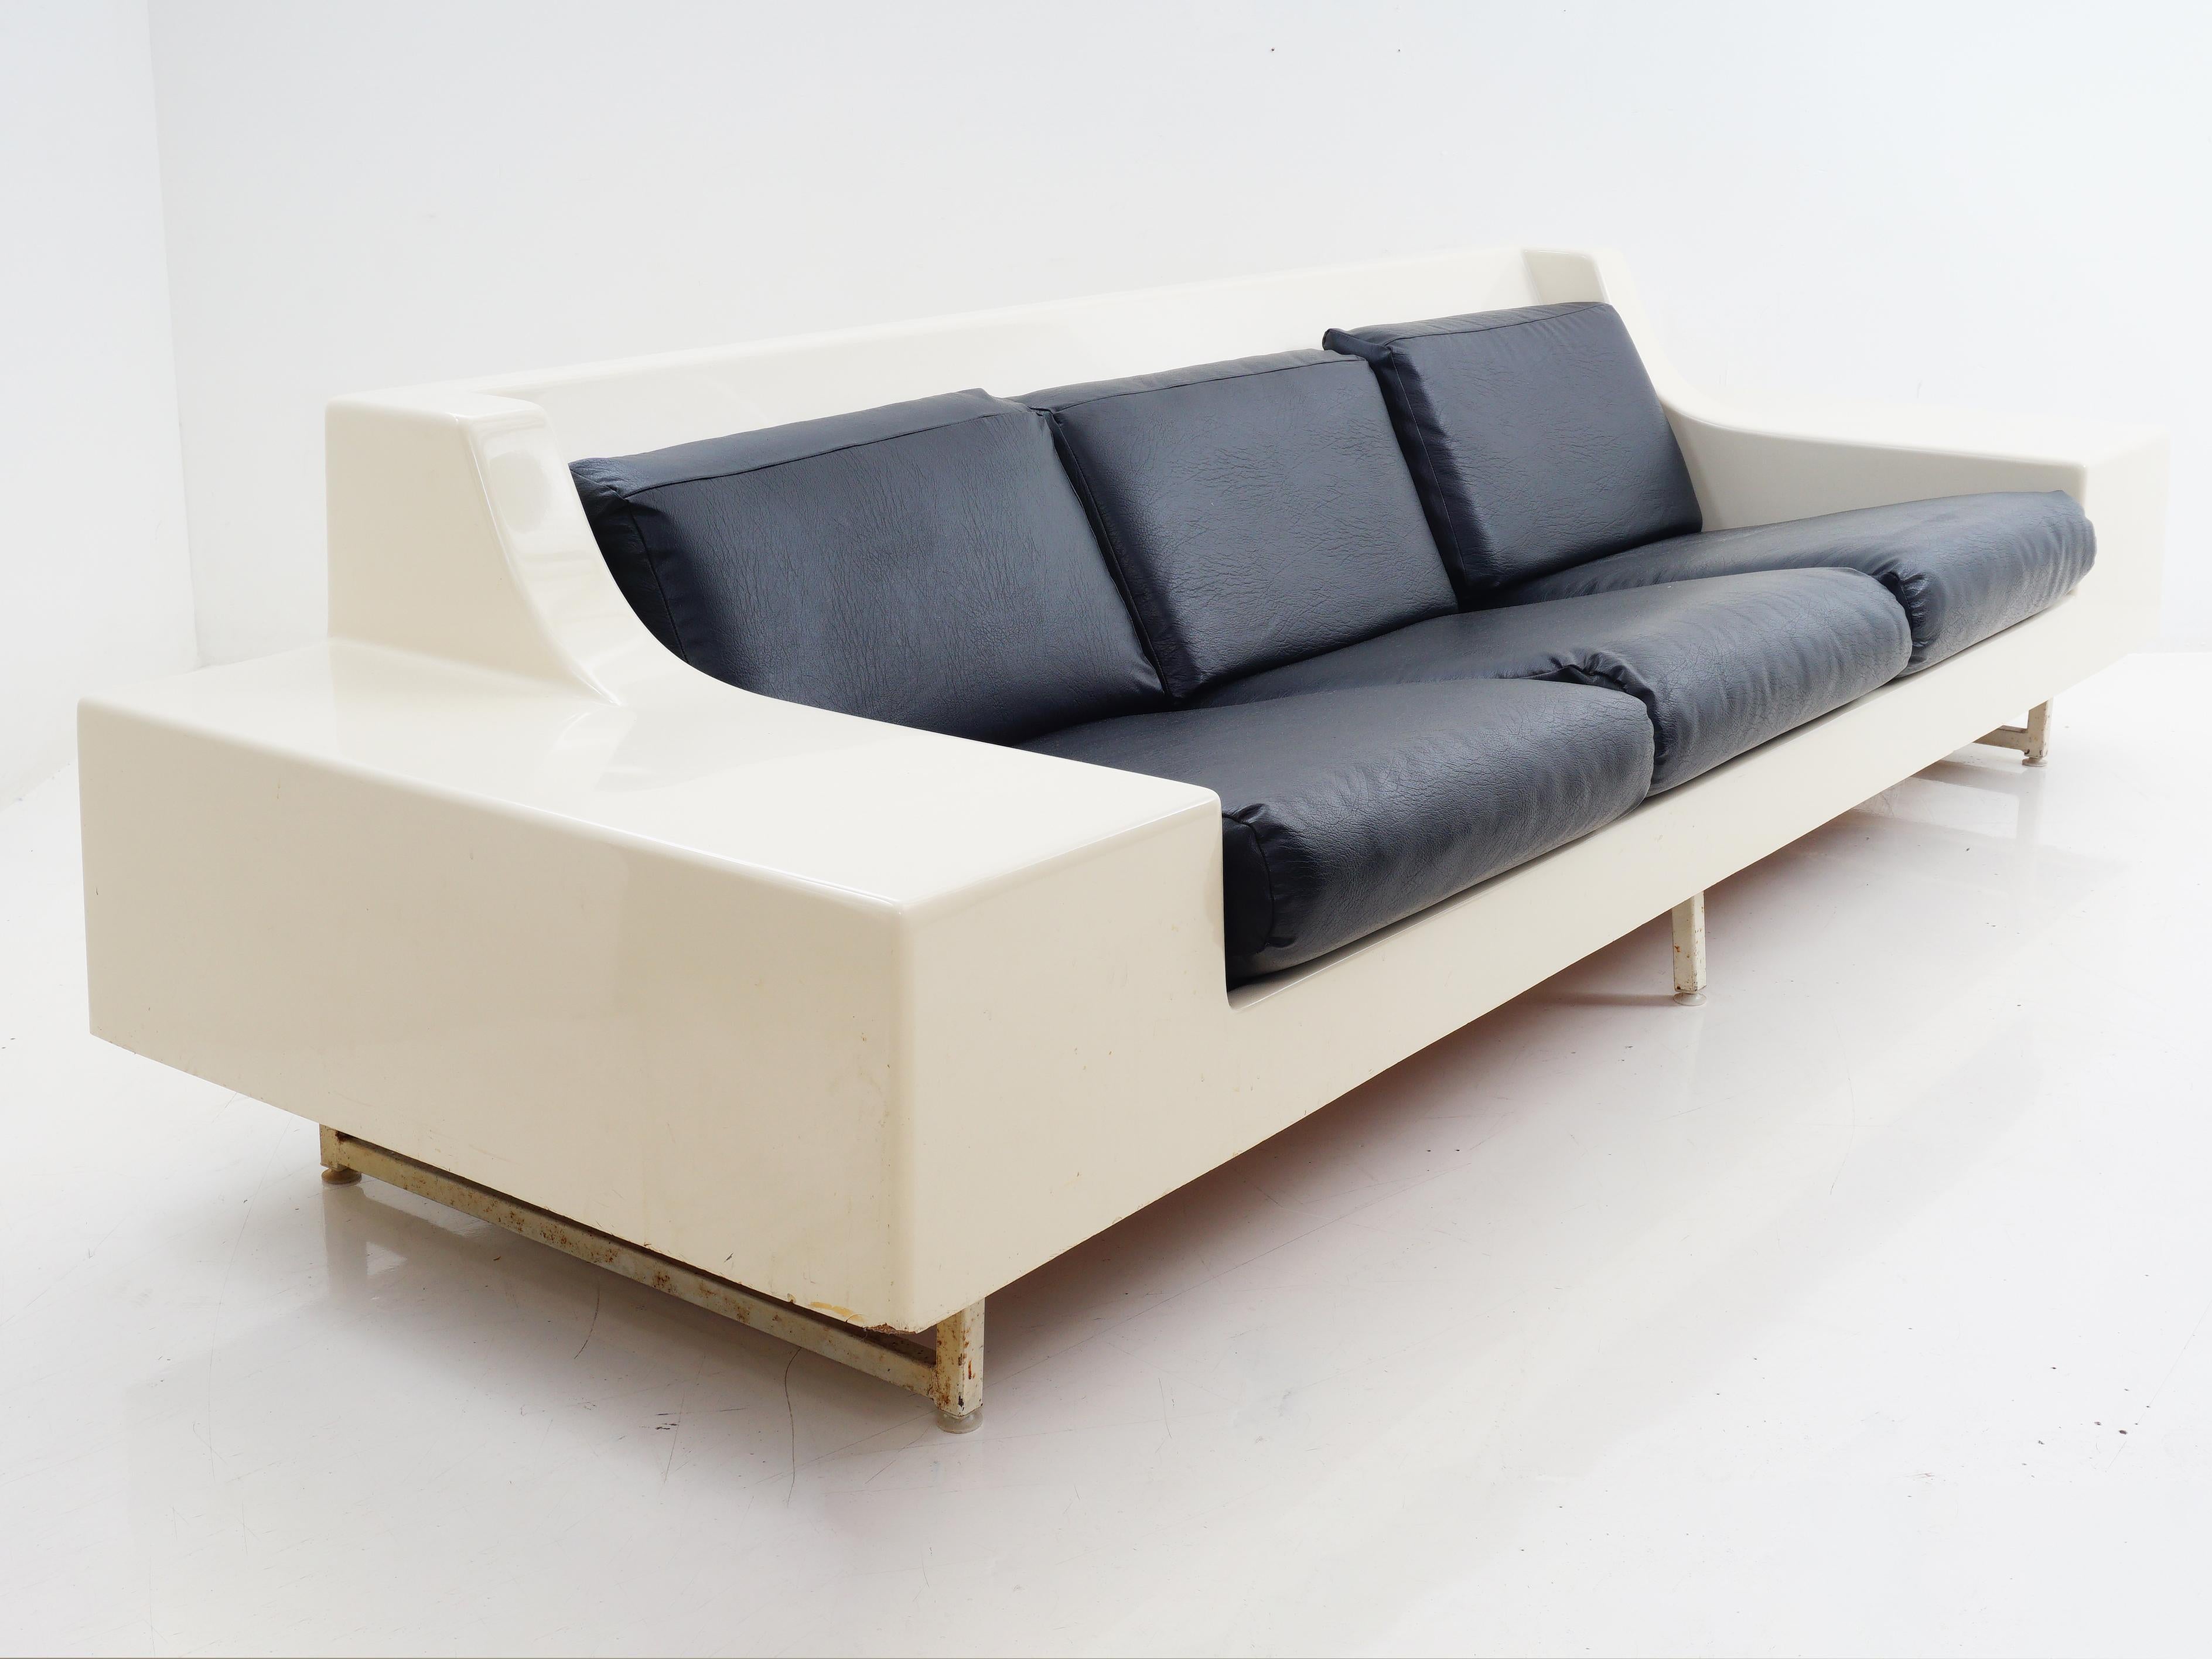 Step into a time capsule of comfort with Homecrest's 1965 three-seat sofa. With its off-white fiberglass frame, it's the groovy embodiment of midcentury vibes – perfect for channeling your inner Edie Sedgwick. Sip your cocktails and lounge like it's